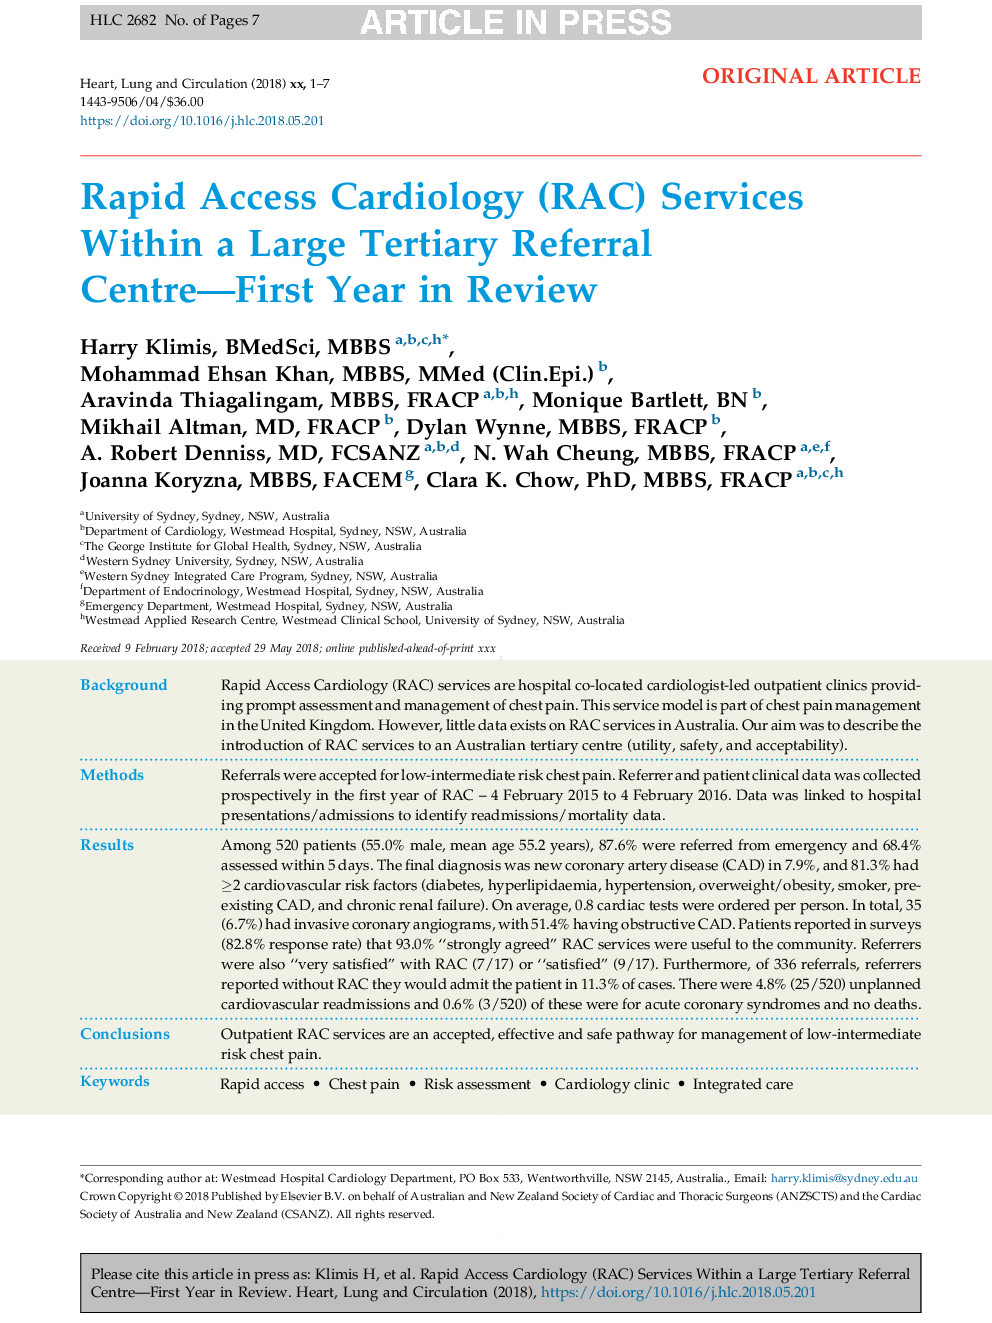 Rapid Access Cardiology (RAC) Services Within a Large Tertiary Referral Centre-First Year in Review